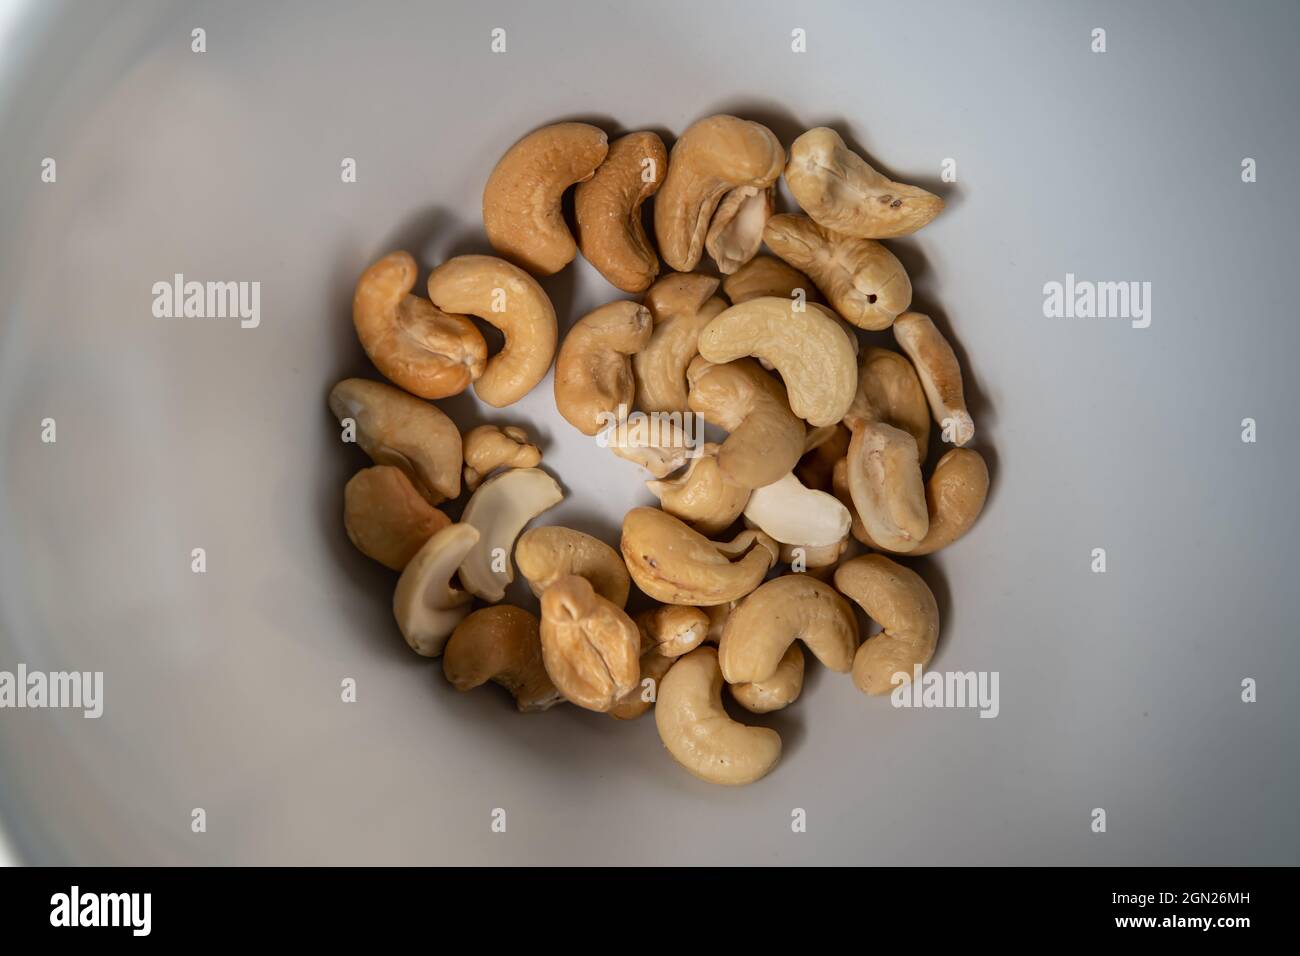 Roasted cashew nut in a white bowl Stock Photo